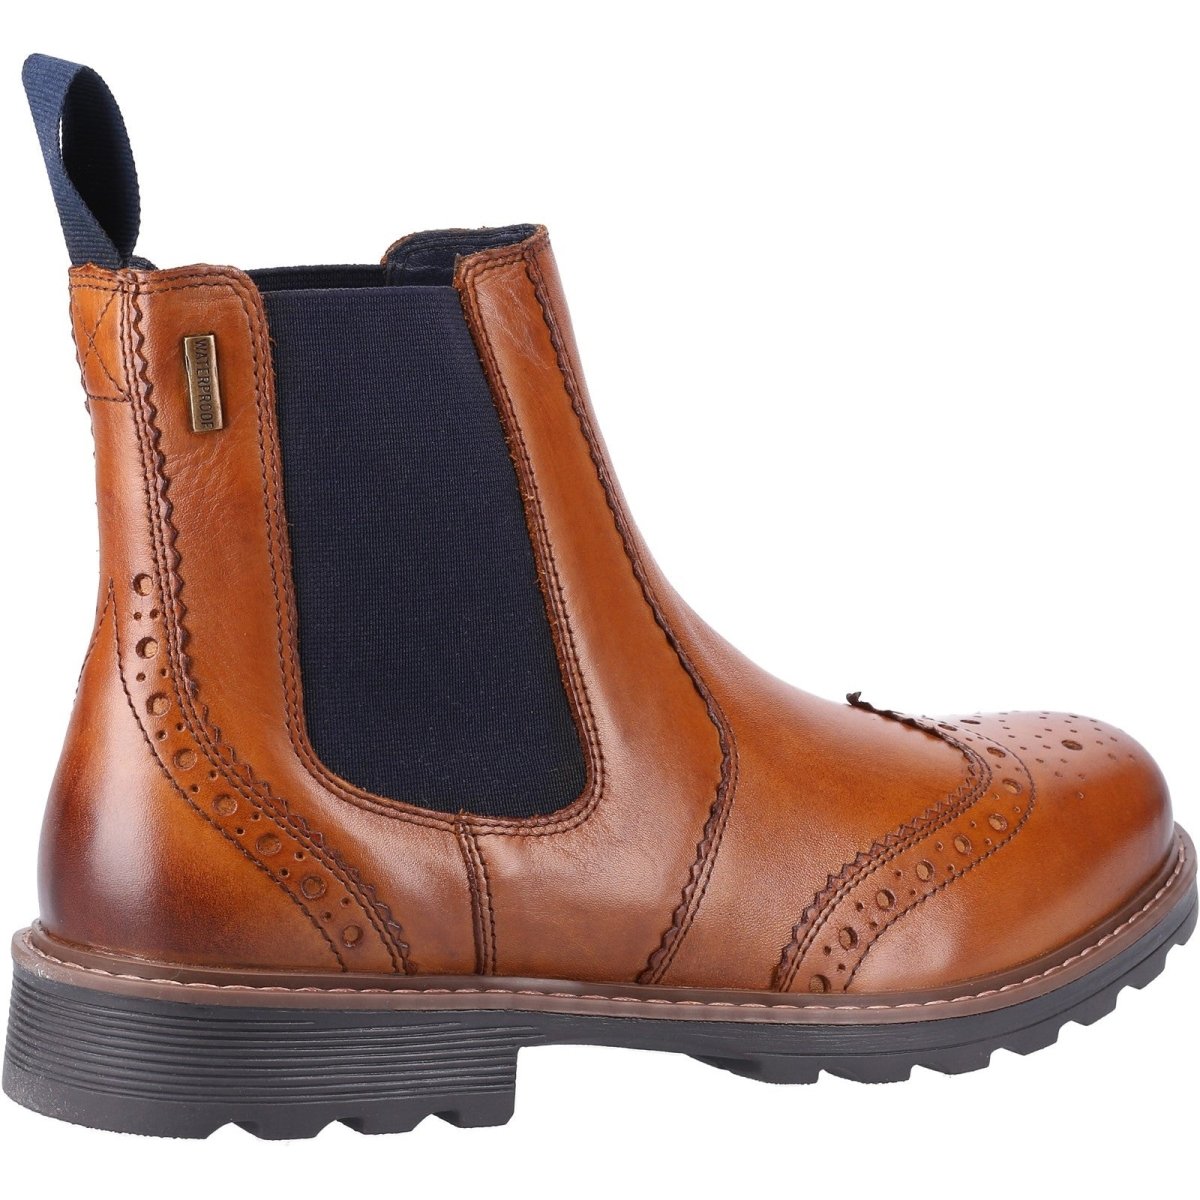 Cotswold Ford Boots - Shoe Store Direct